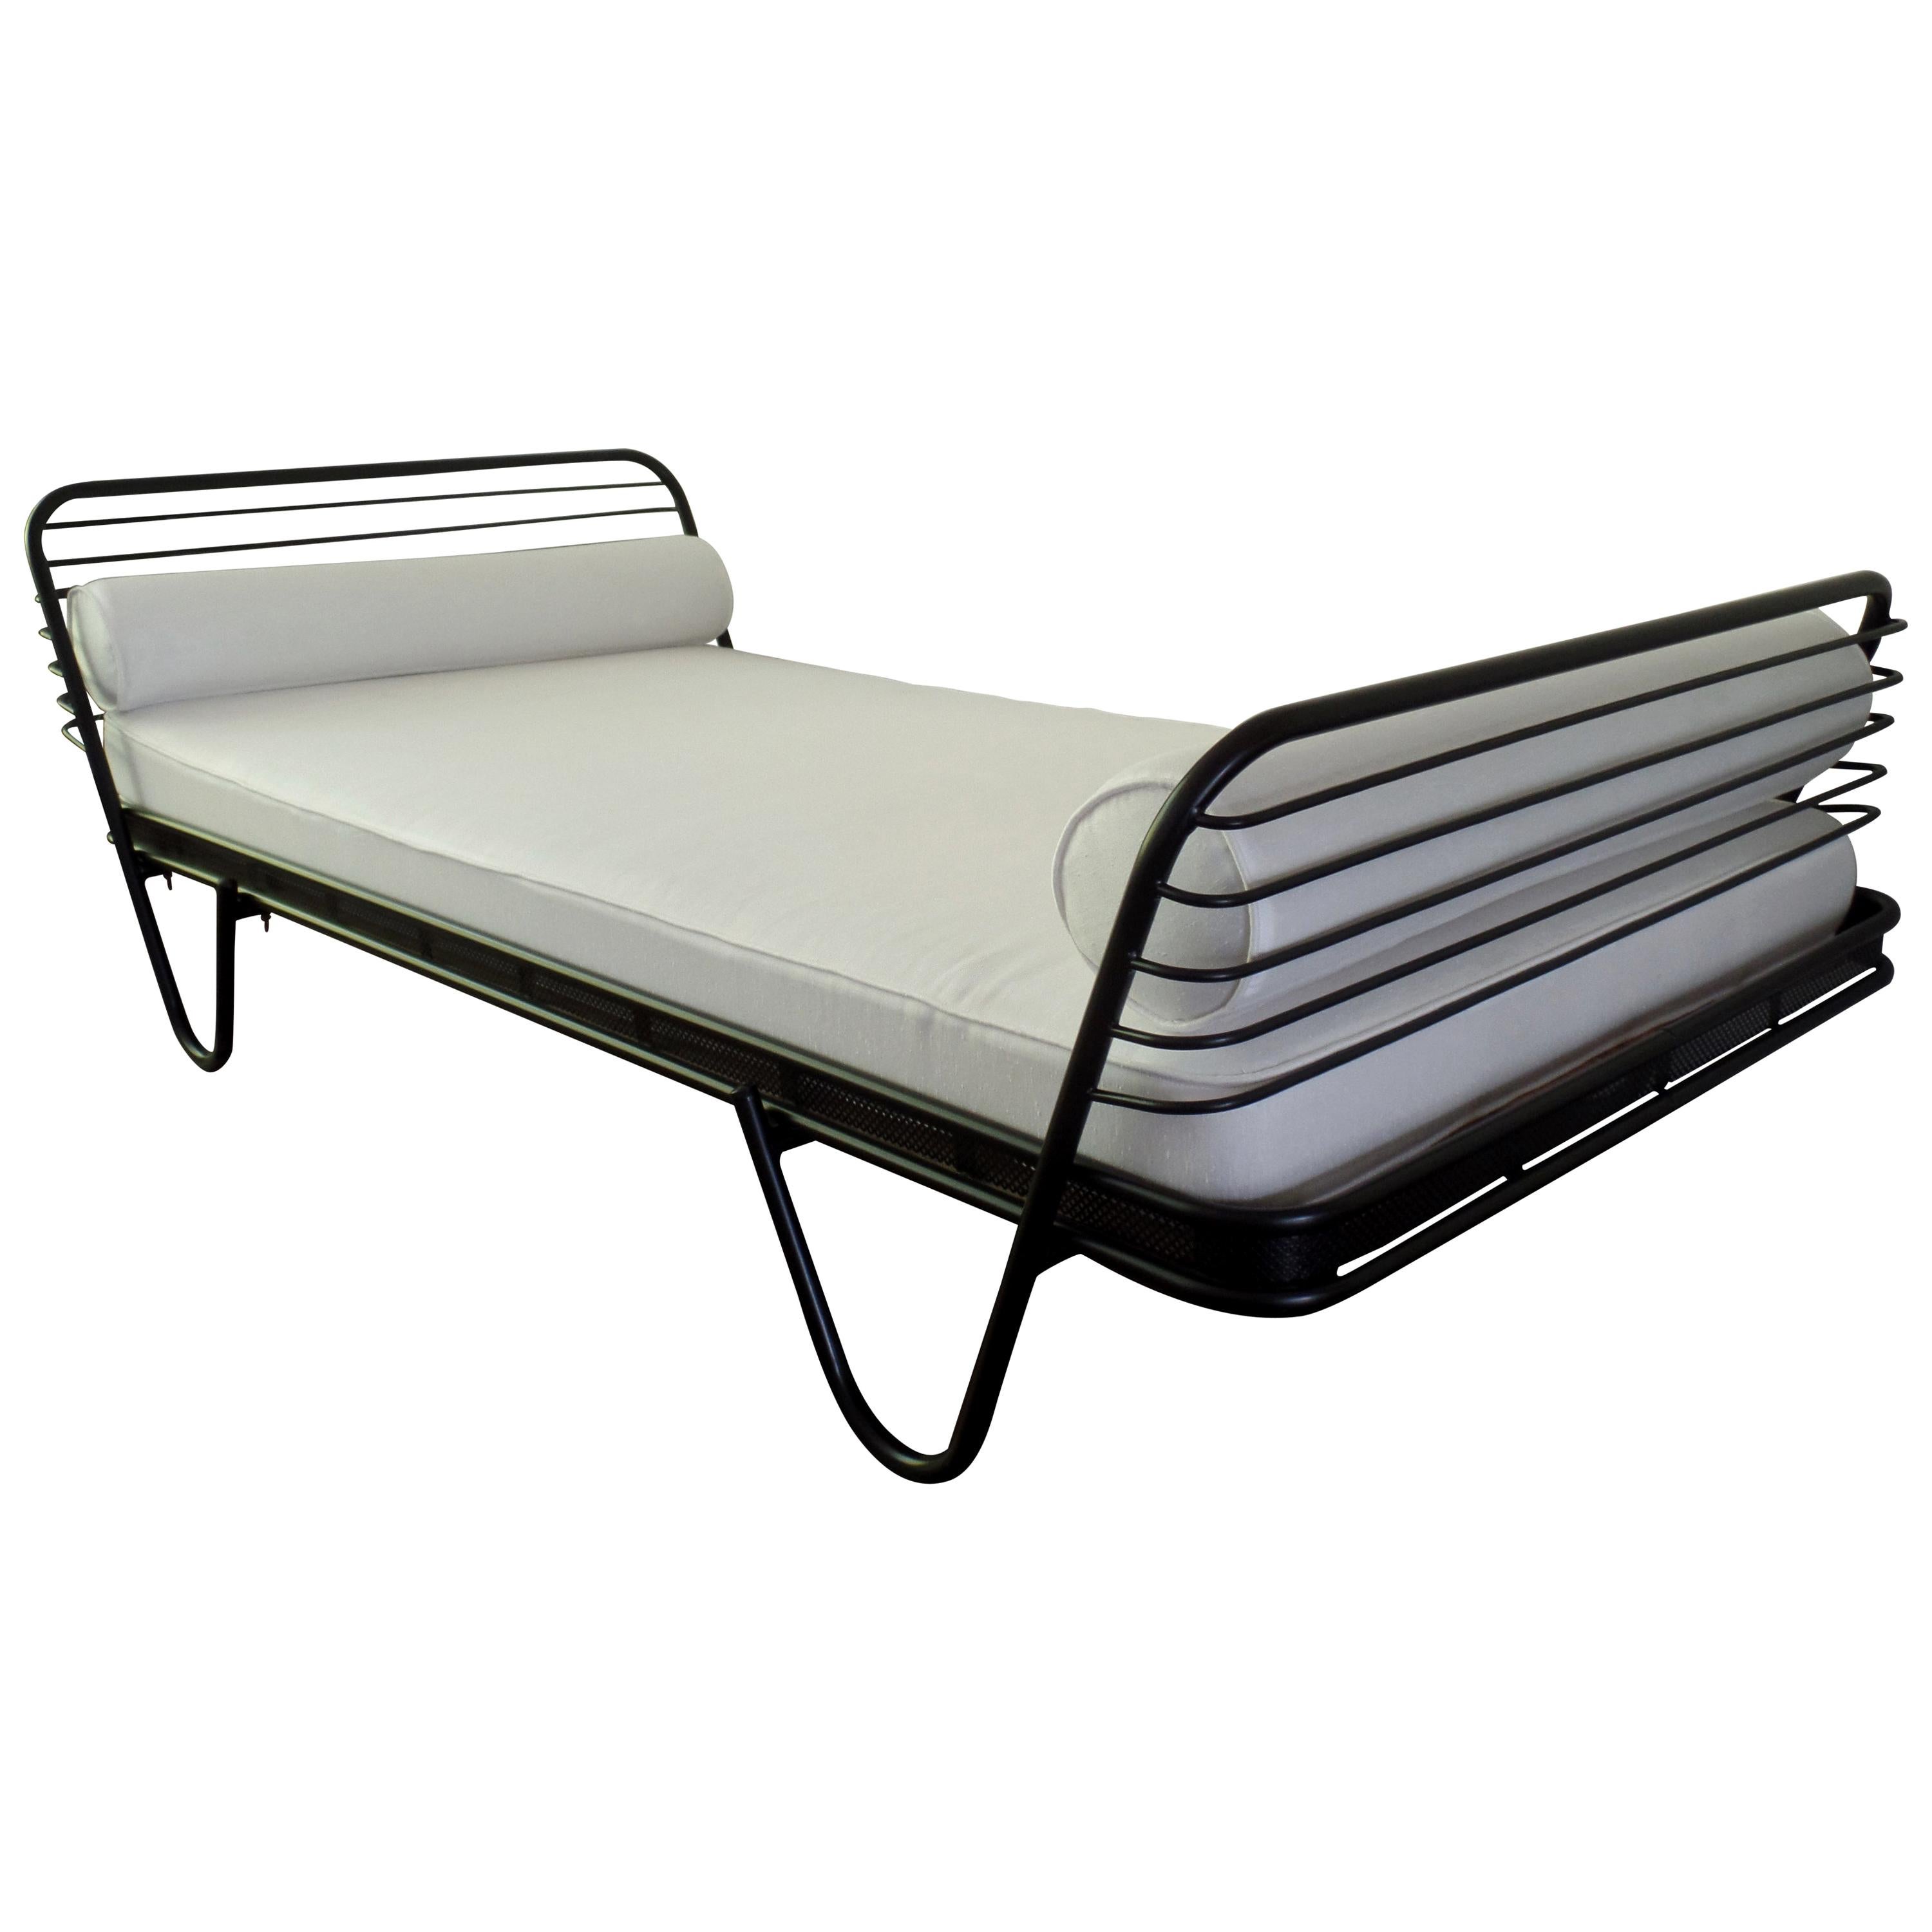 French Mid-Century Modern 'Kyoto' Enameled Iron Daybed / Bed by Mathieu Matégot